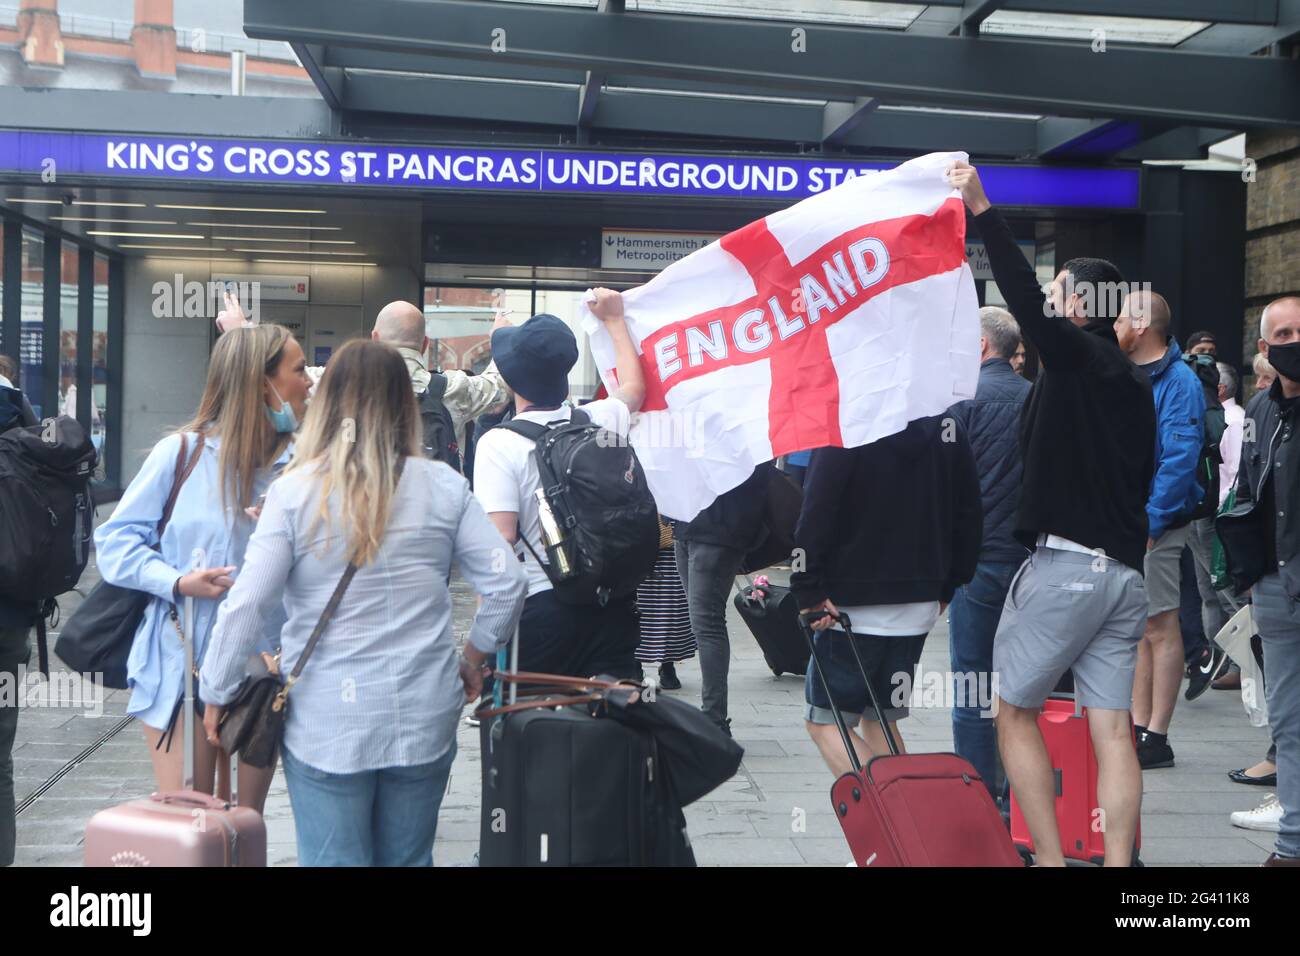 England fans at King's Cross station in London ahead of the UEFA Euro 2020 Group D match between England and Scotland at Wembley Stadium. Picture date: Friday June 18, 2021. Stock Photo